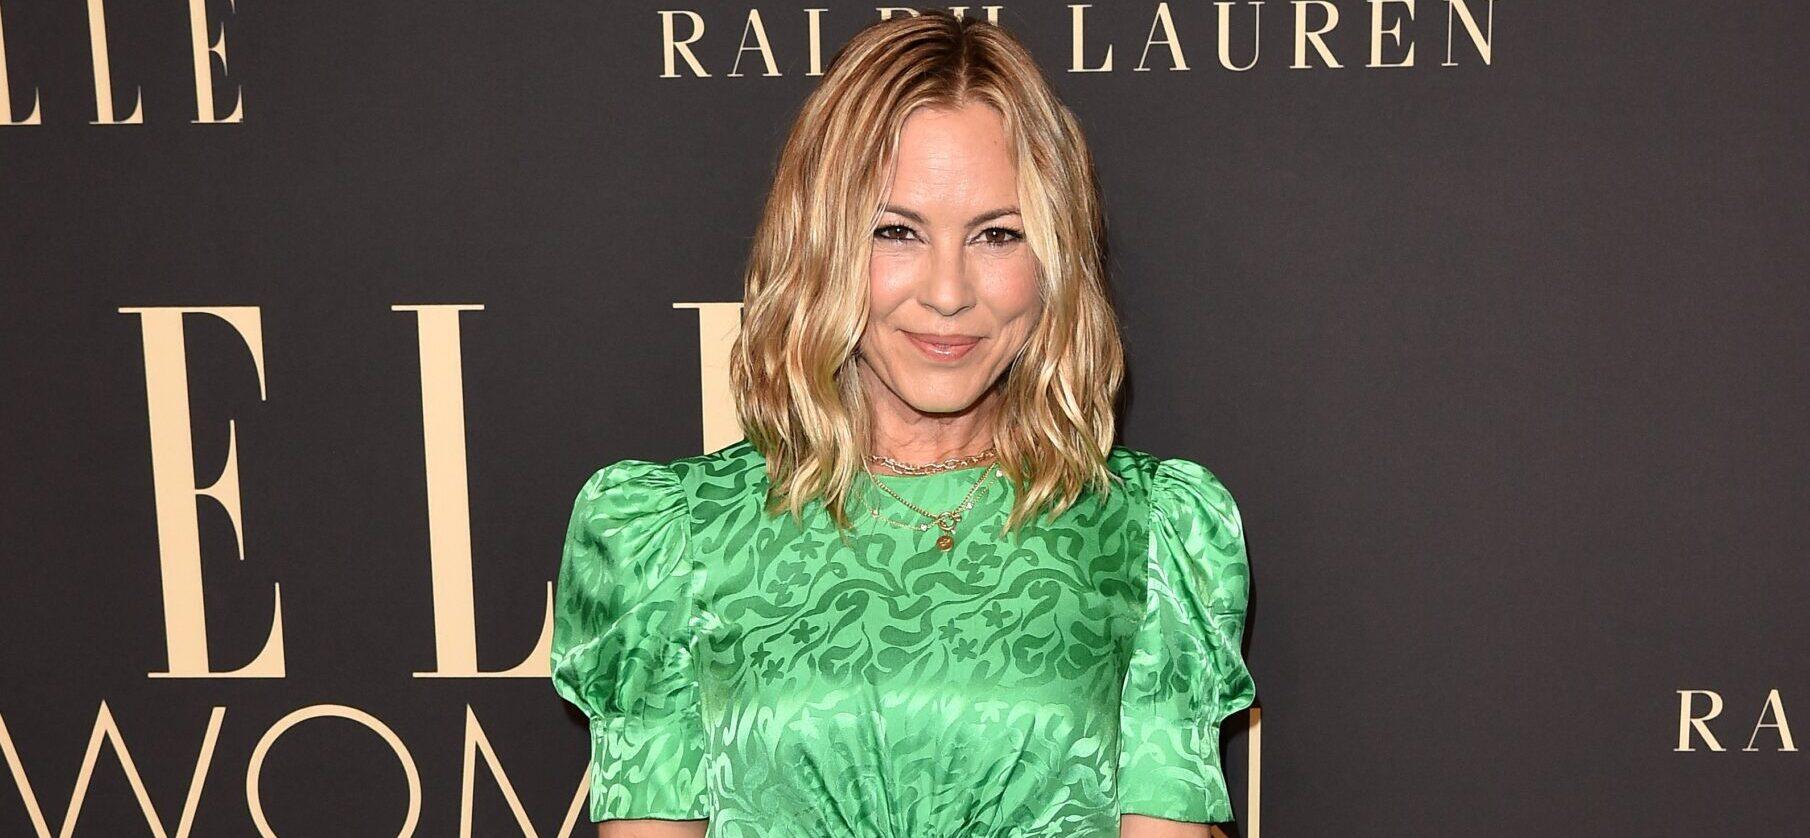 ‘I’m Back From My (Meno)Pause’: Maria Bello Returns To IG To Share Journey